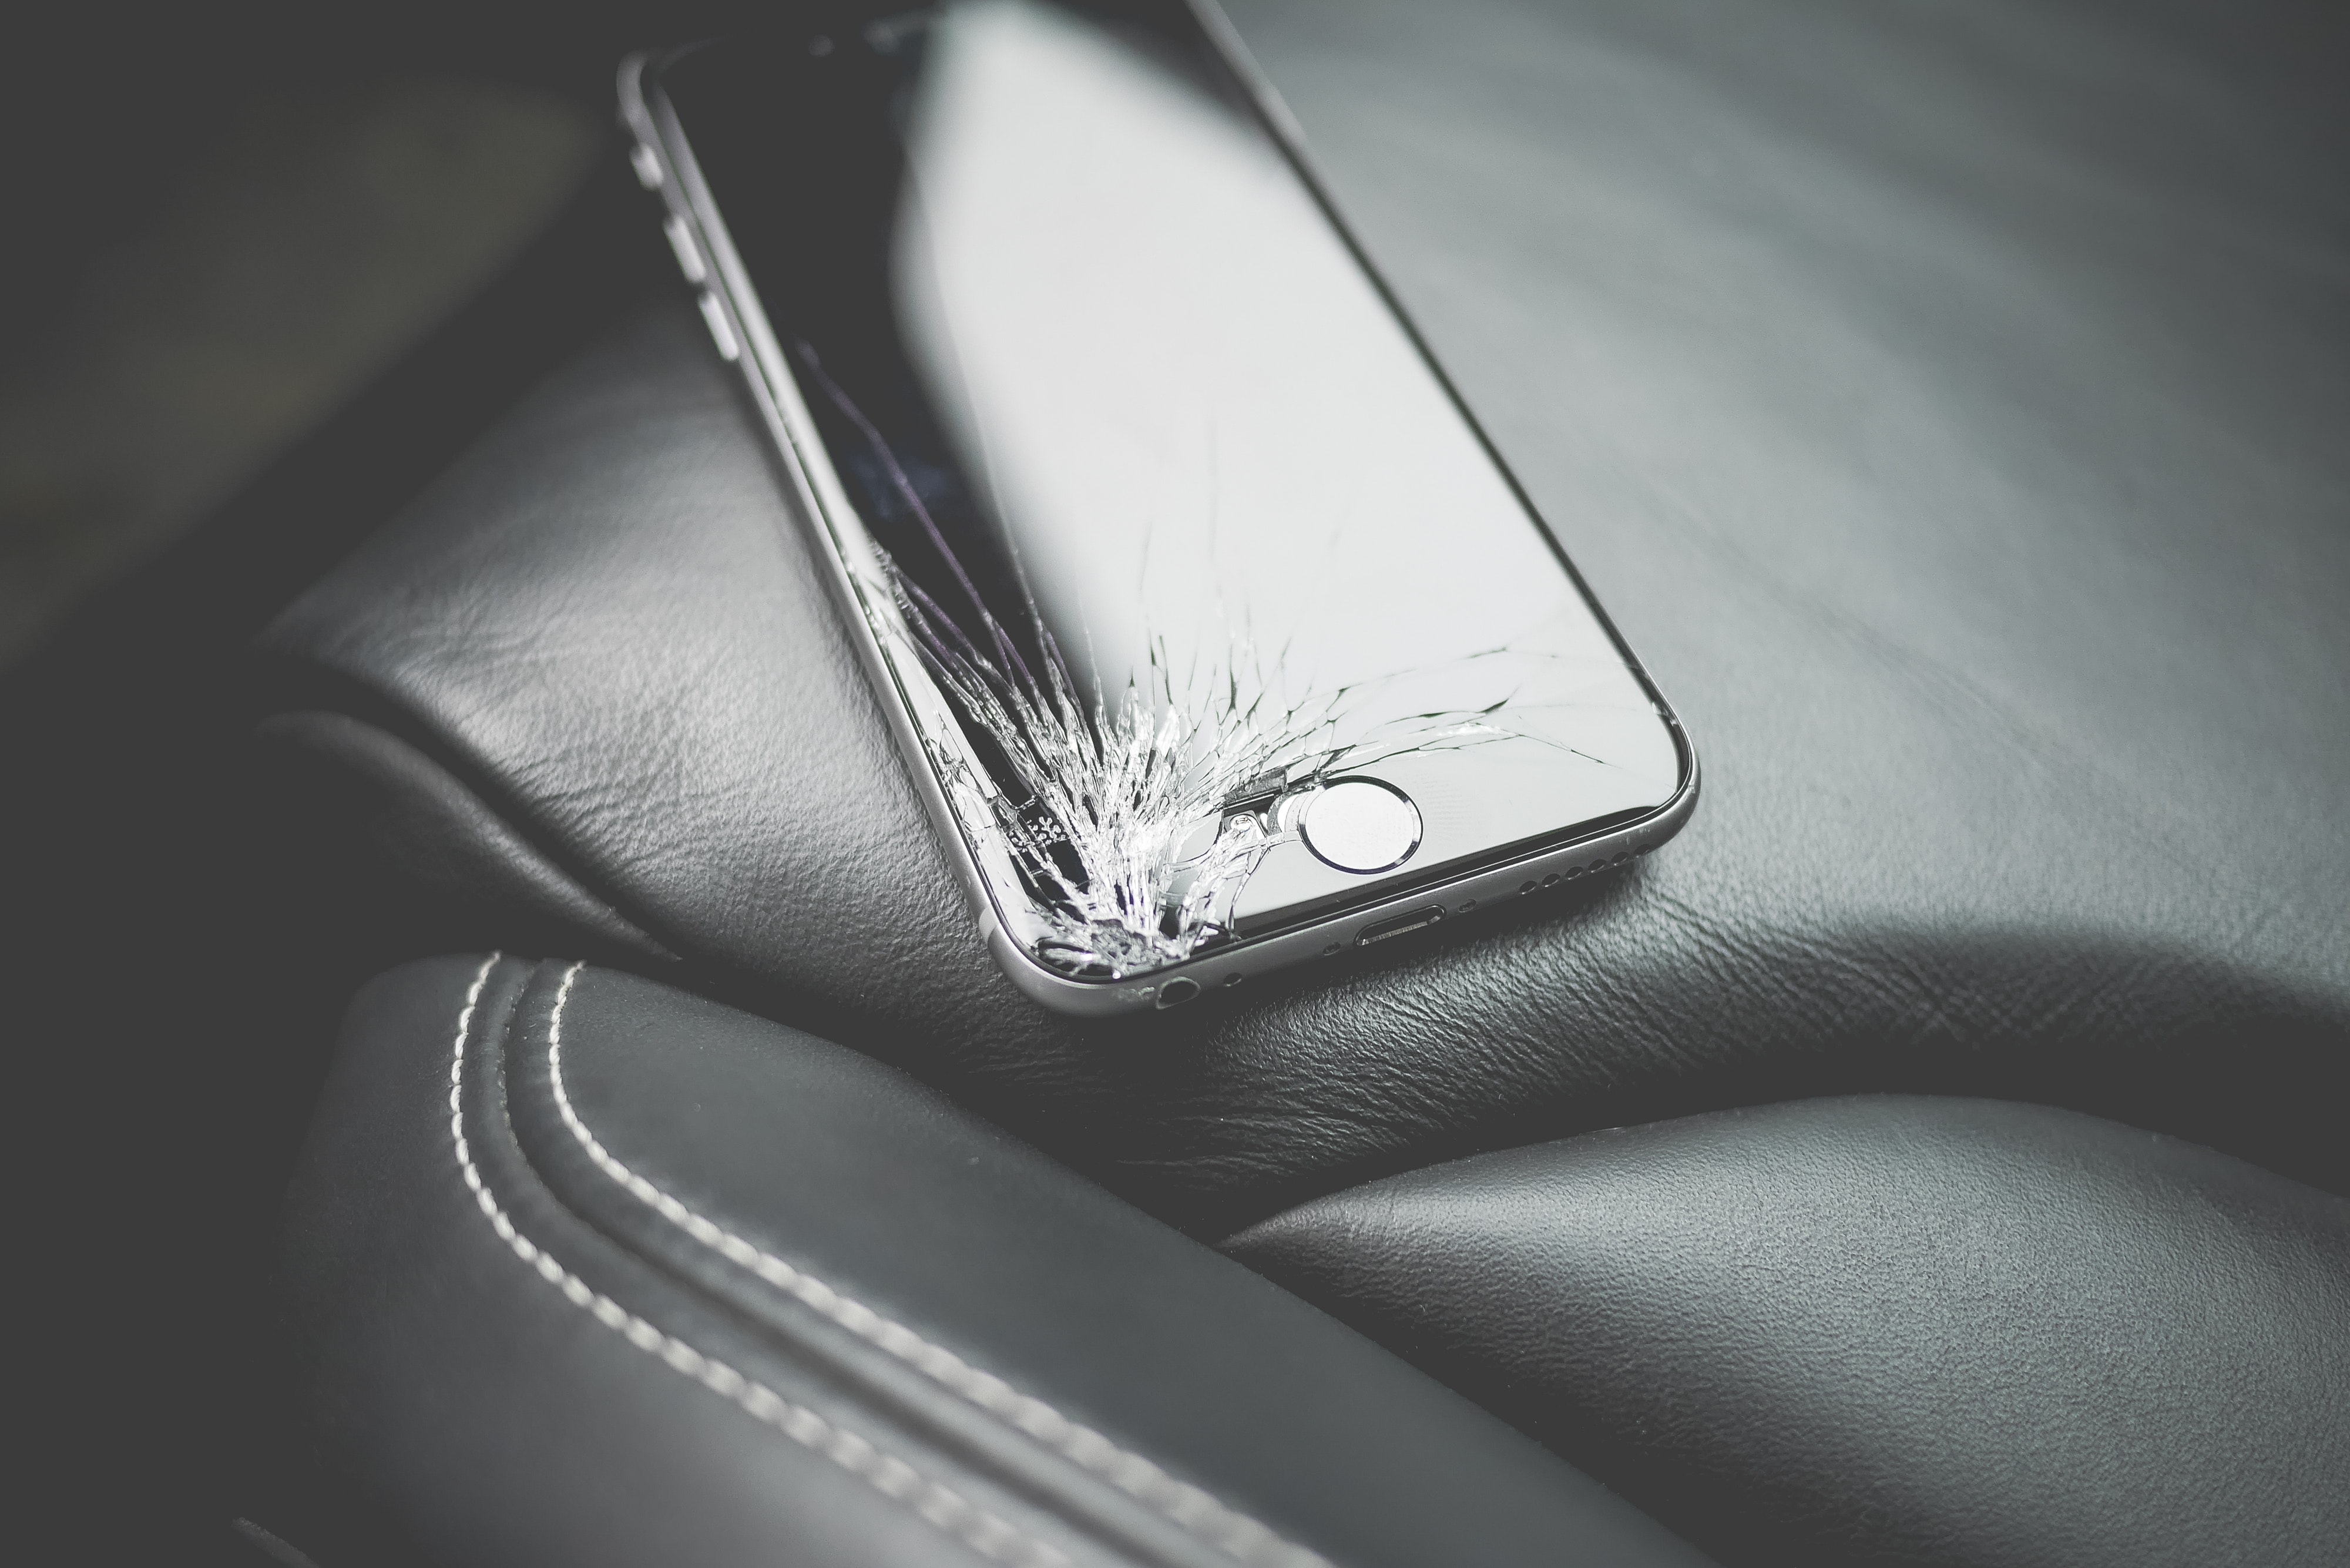 Cassie broke her one-month-old iPhone. | Source: Pexels